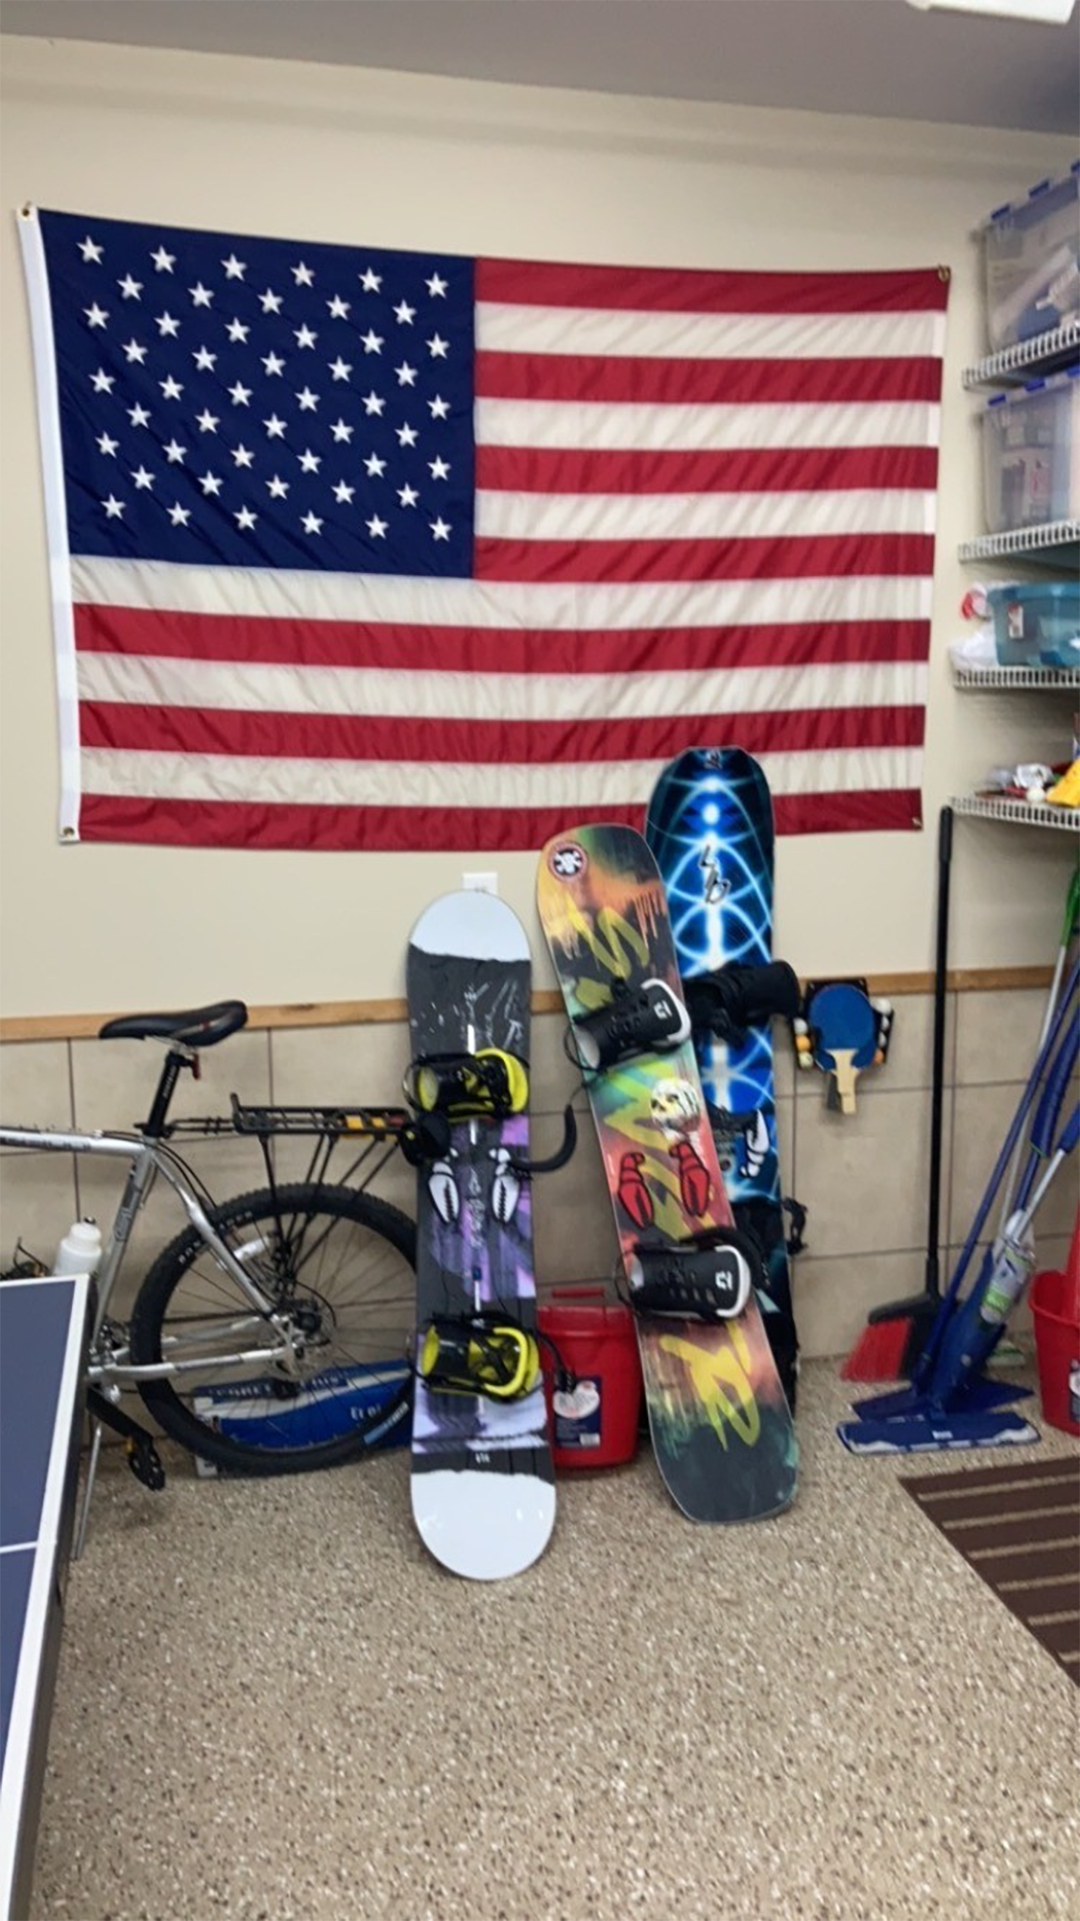 An American flag hangs on the wall above three colorful snowboards leaning against it, and a bicycle is positioned to the left.